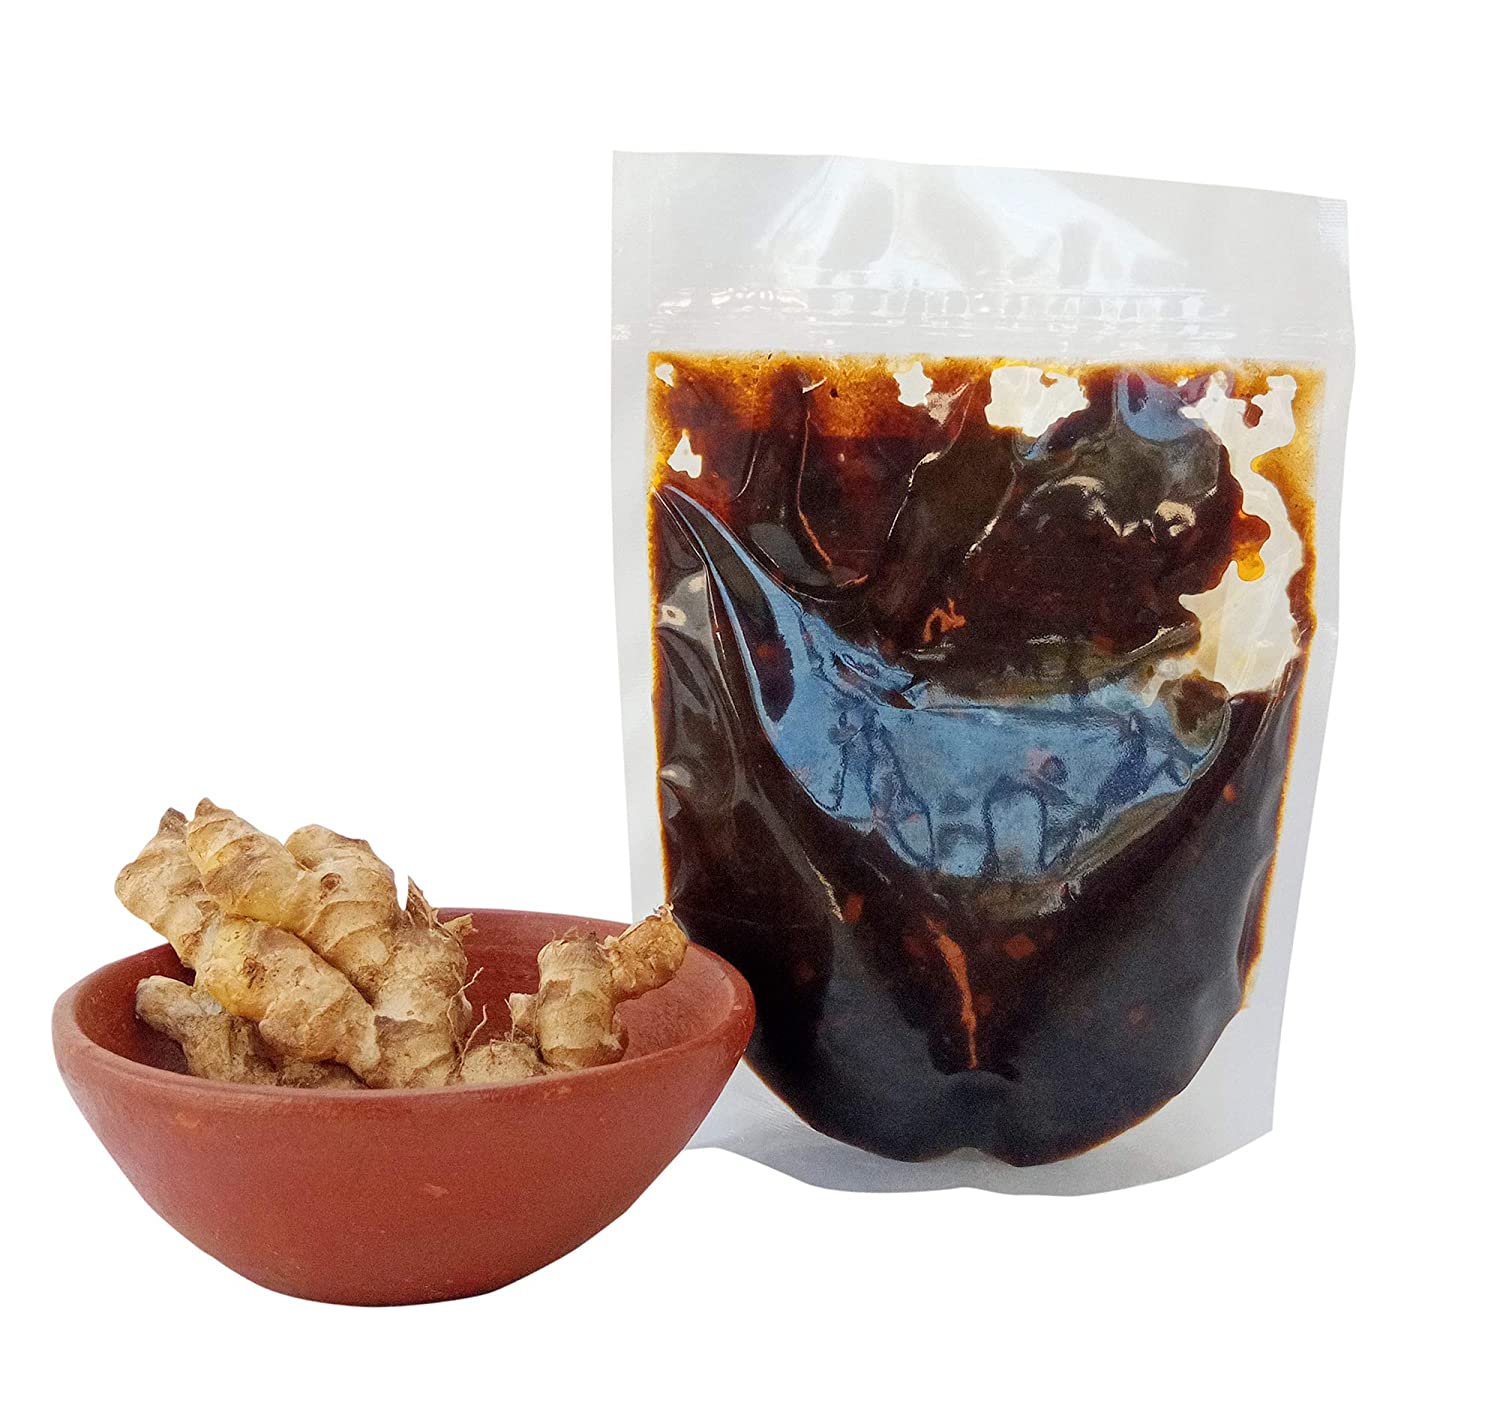 Naturals & Consumatic Kerala Special Homemade Puliyinchi Sweet and Sour Ginger Pickle Image